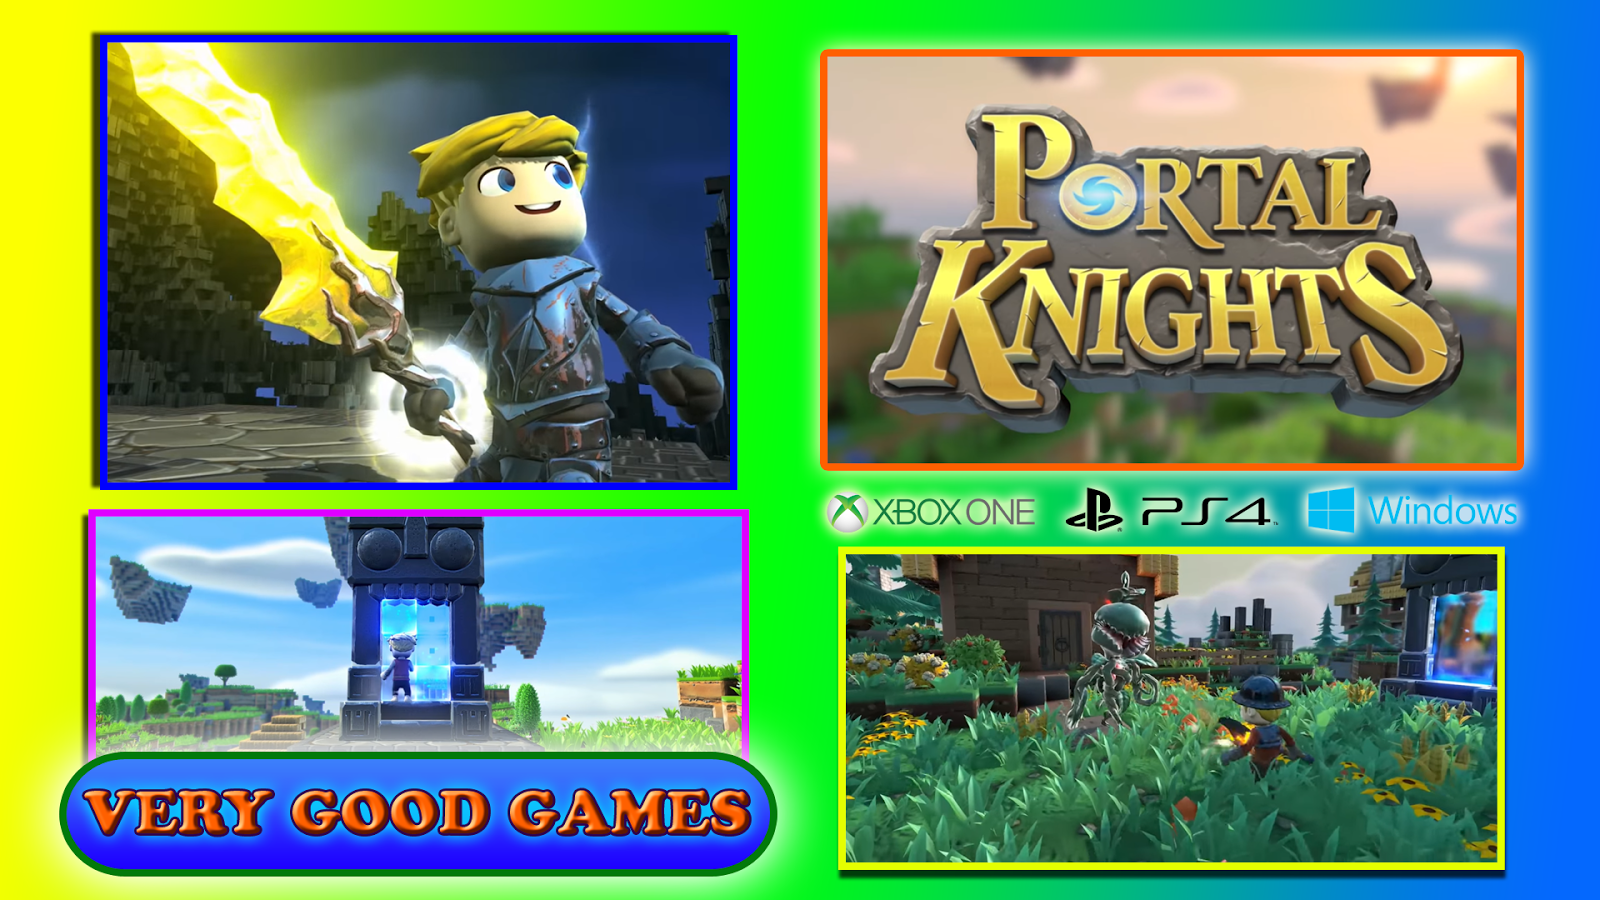 Portal Knights - adventure RPG for PS4 and Xbox One game consoles, for Windows laptops and desktops